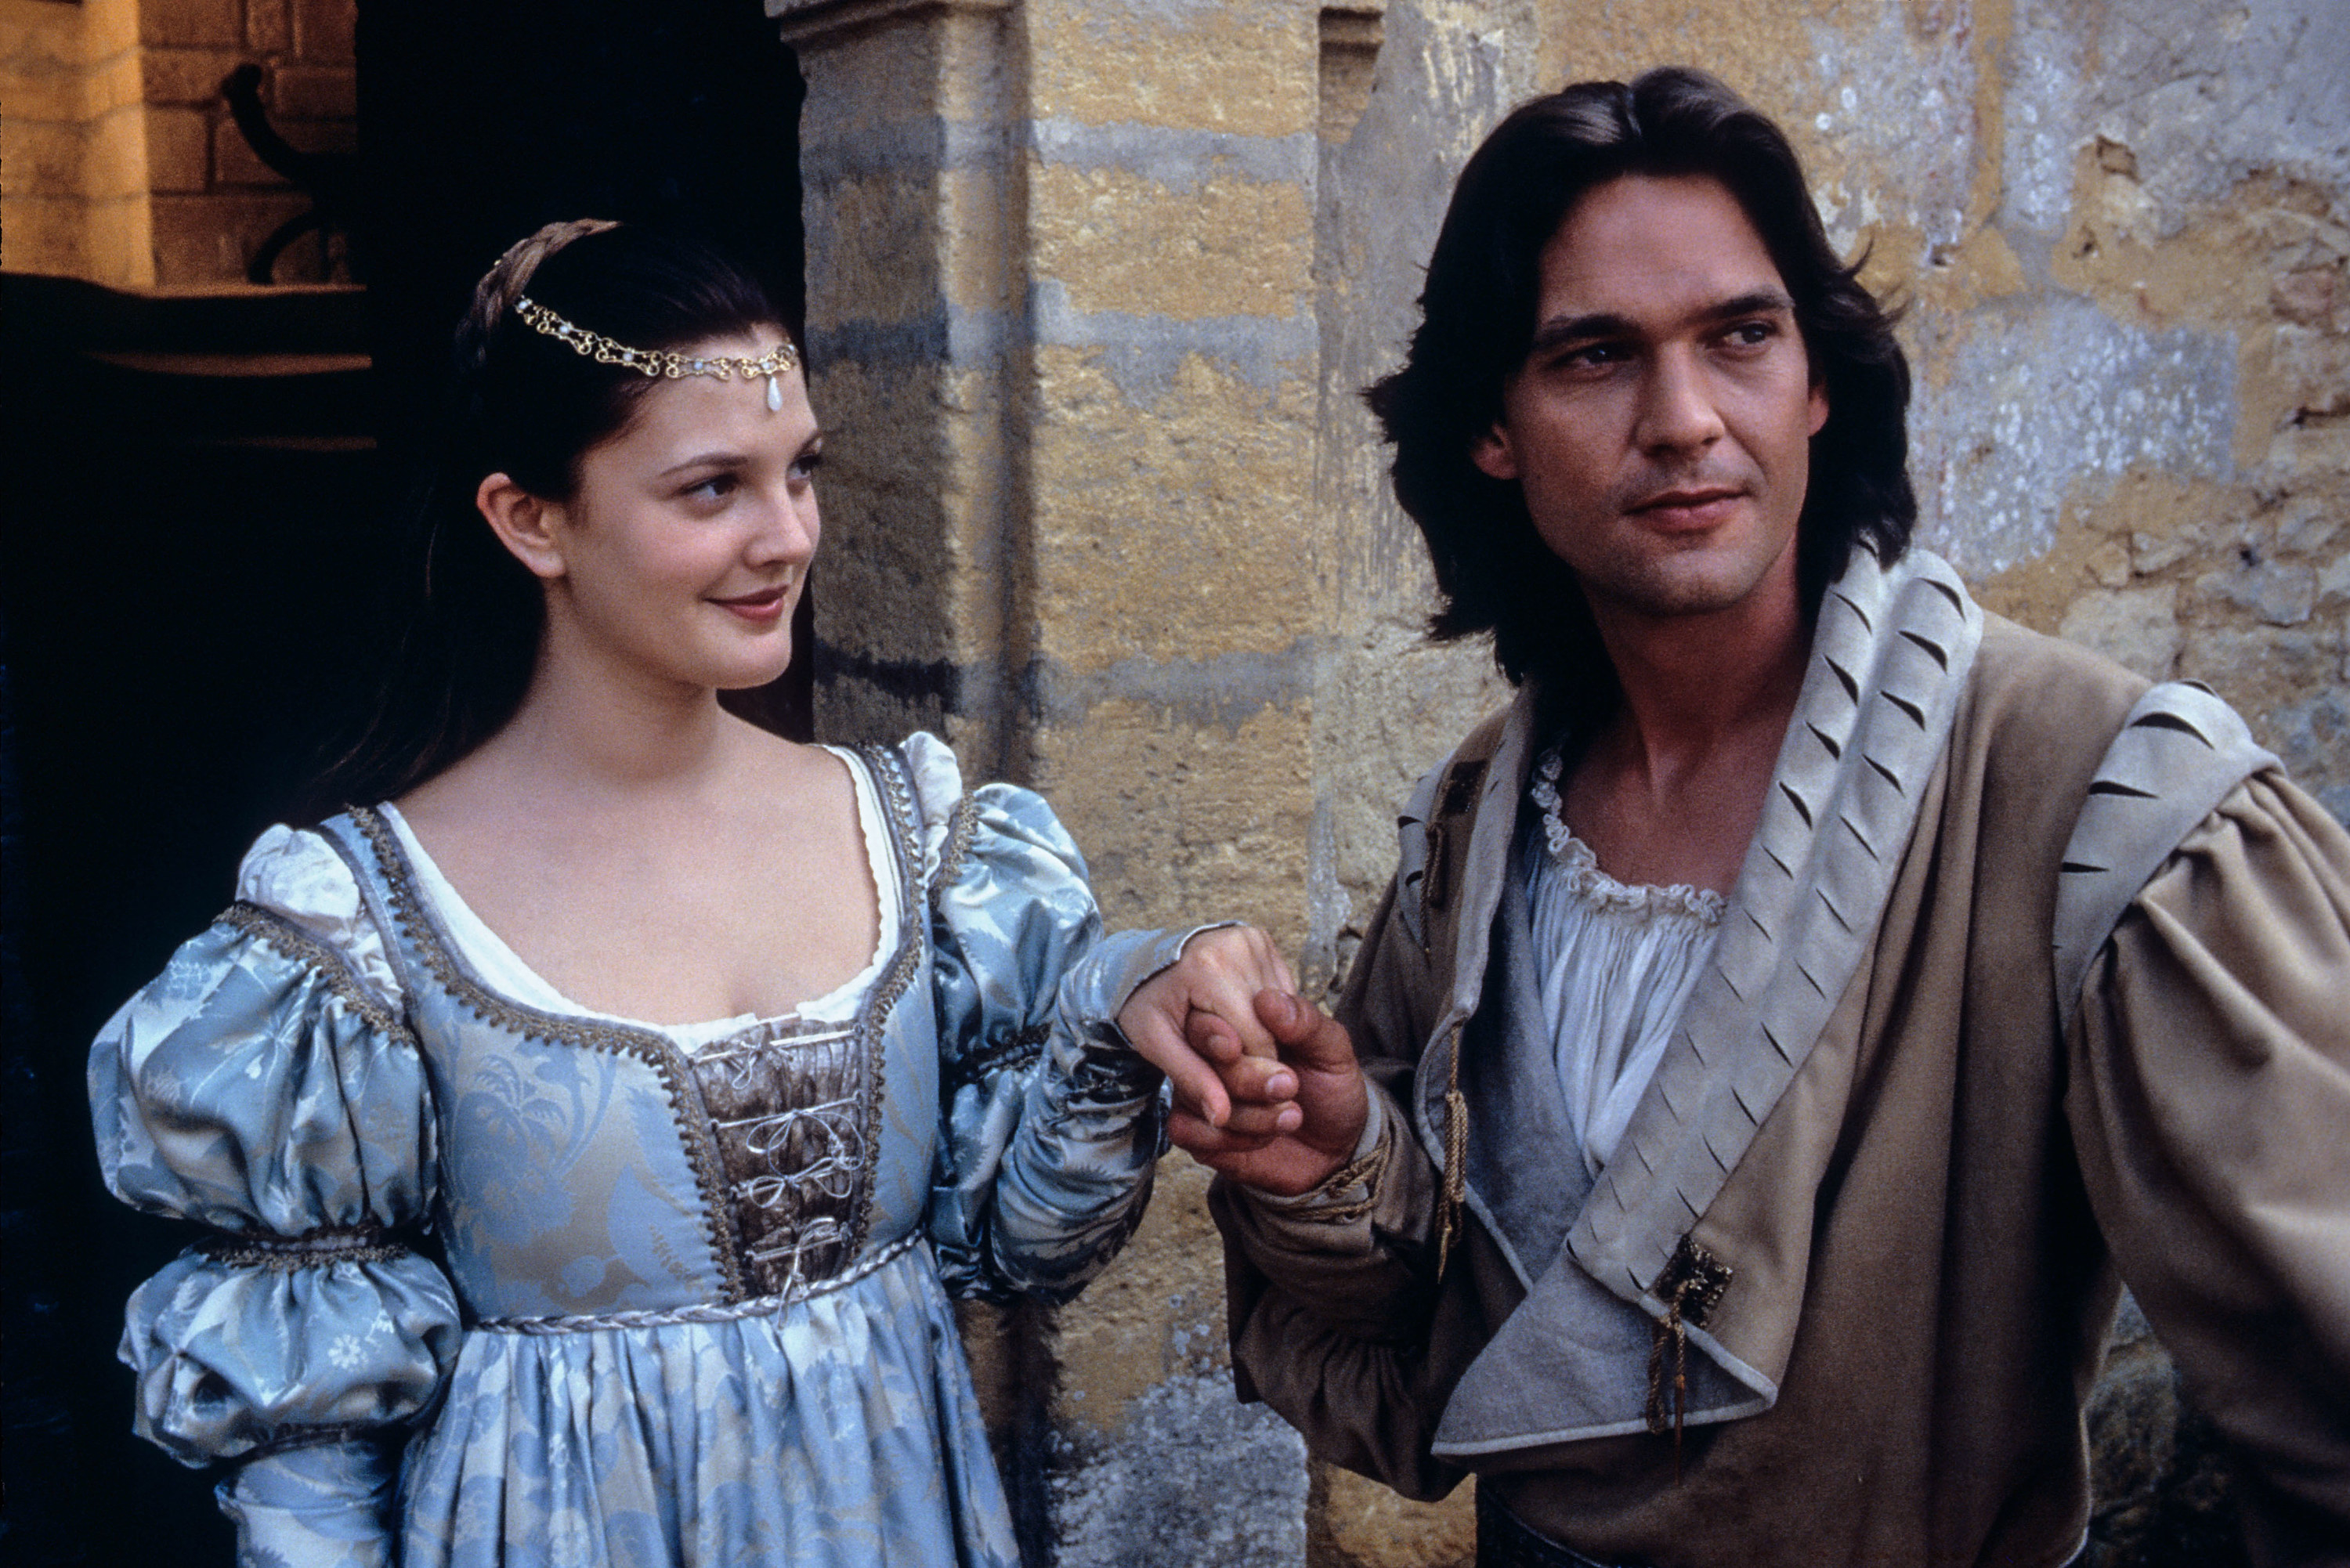 Drew Barrymore as Danielle with Dougray Scott as Prince Henry